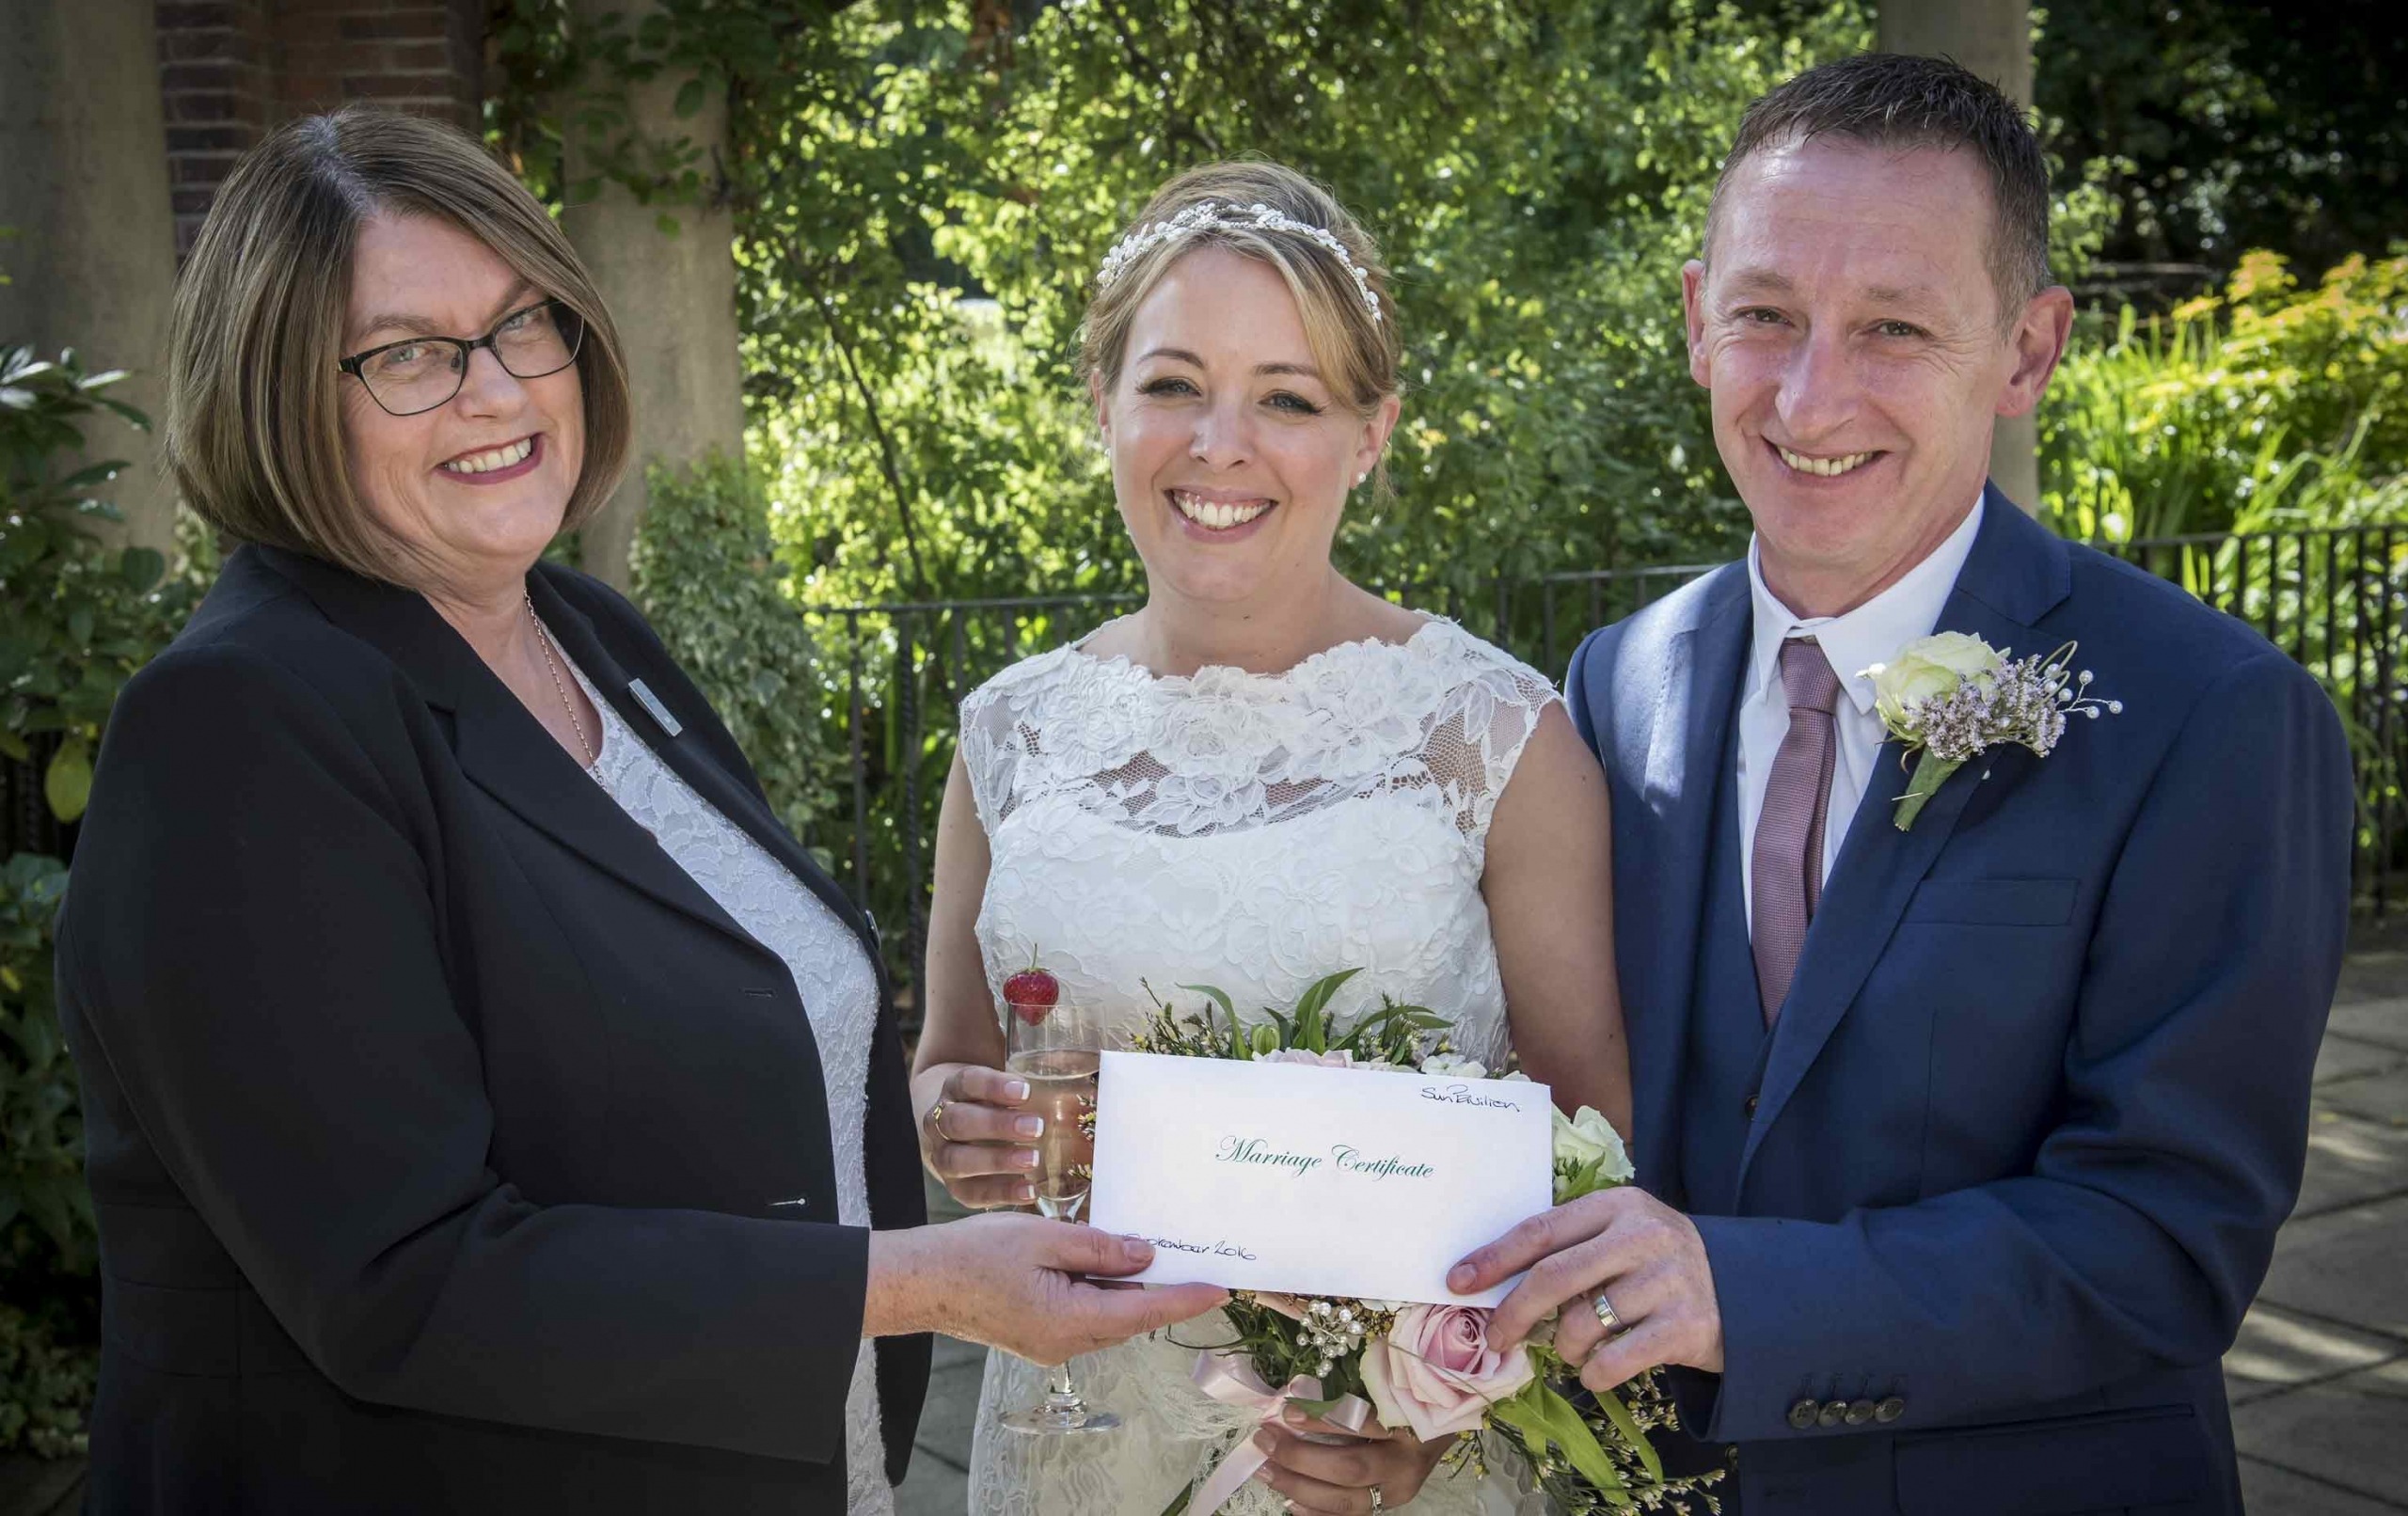 Superintendent Registrar Sue Lewis, left, with newlyweds Alison Towers and Steven Burns at the Sun Pavilion in Valley Gardens, Harrogate